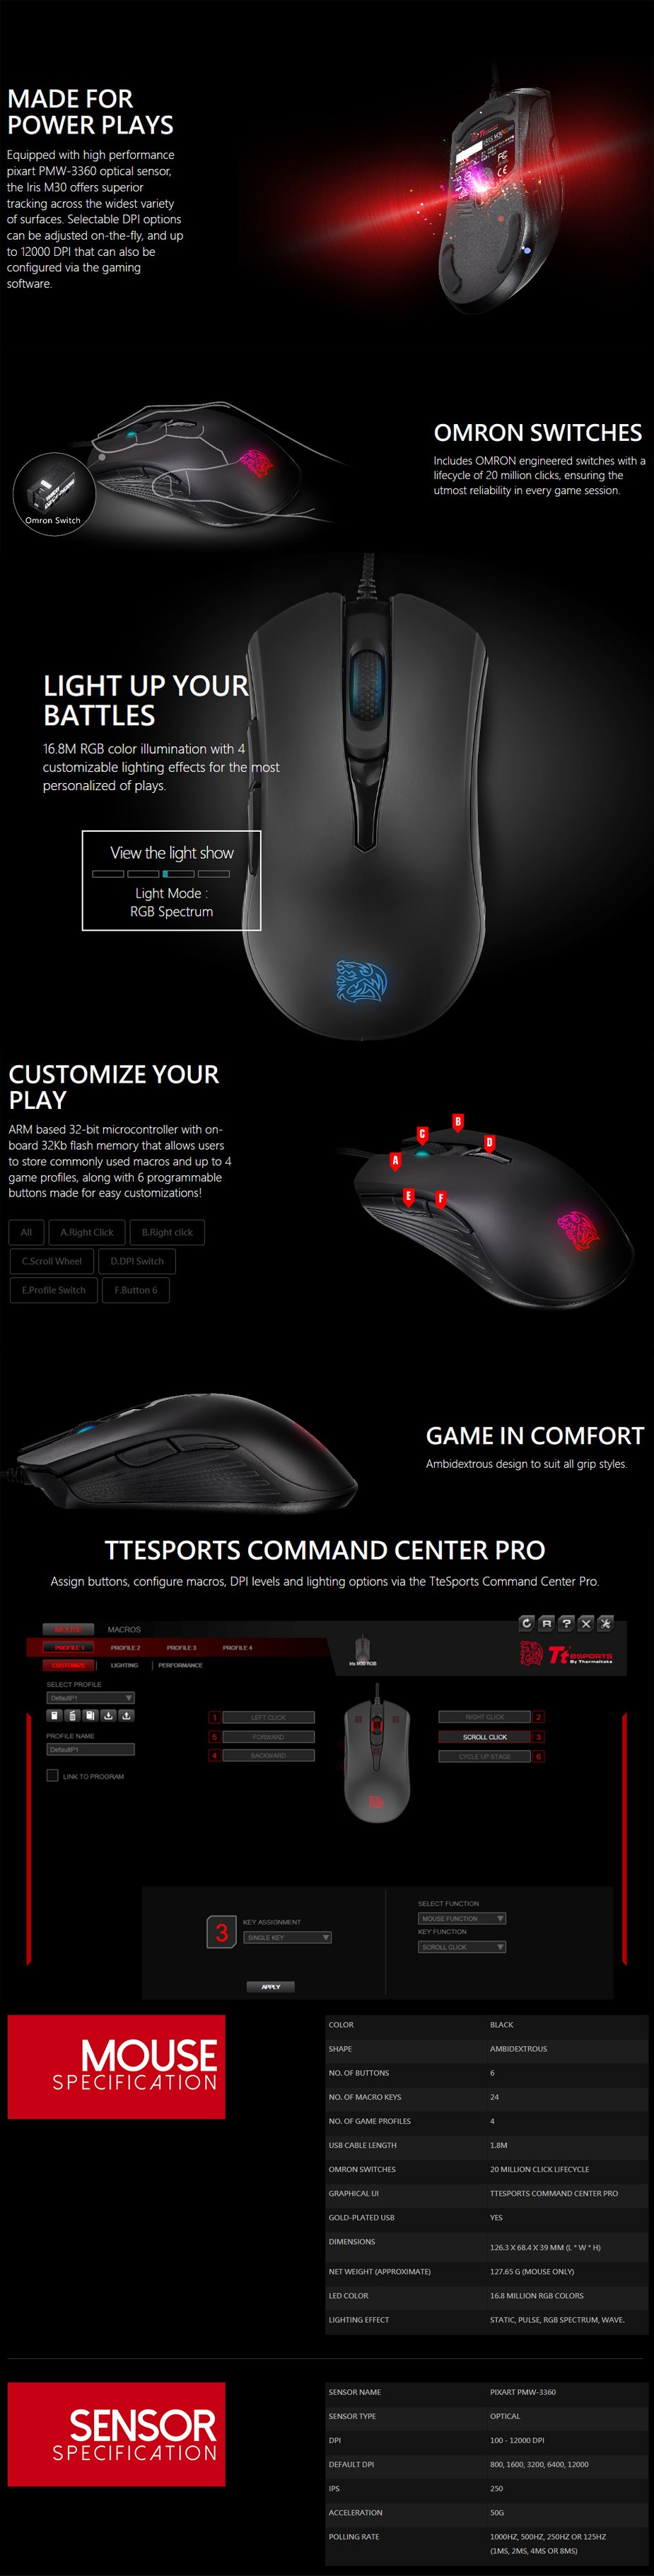 Thermaltake Tt eSPORTS Iris M30 RGB Optical Wired Ambidextrous Gaming Mouse - Overview 1